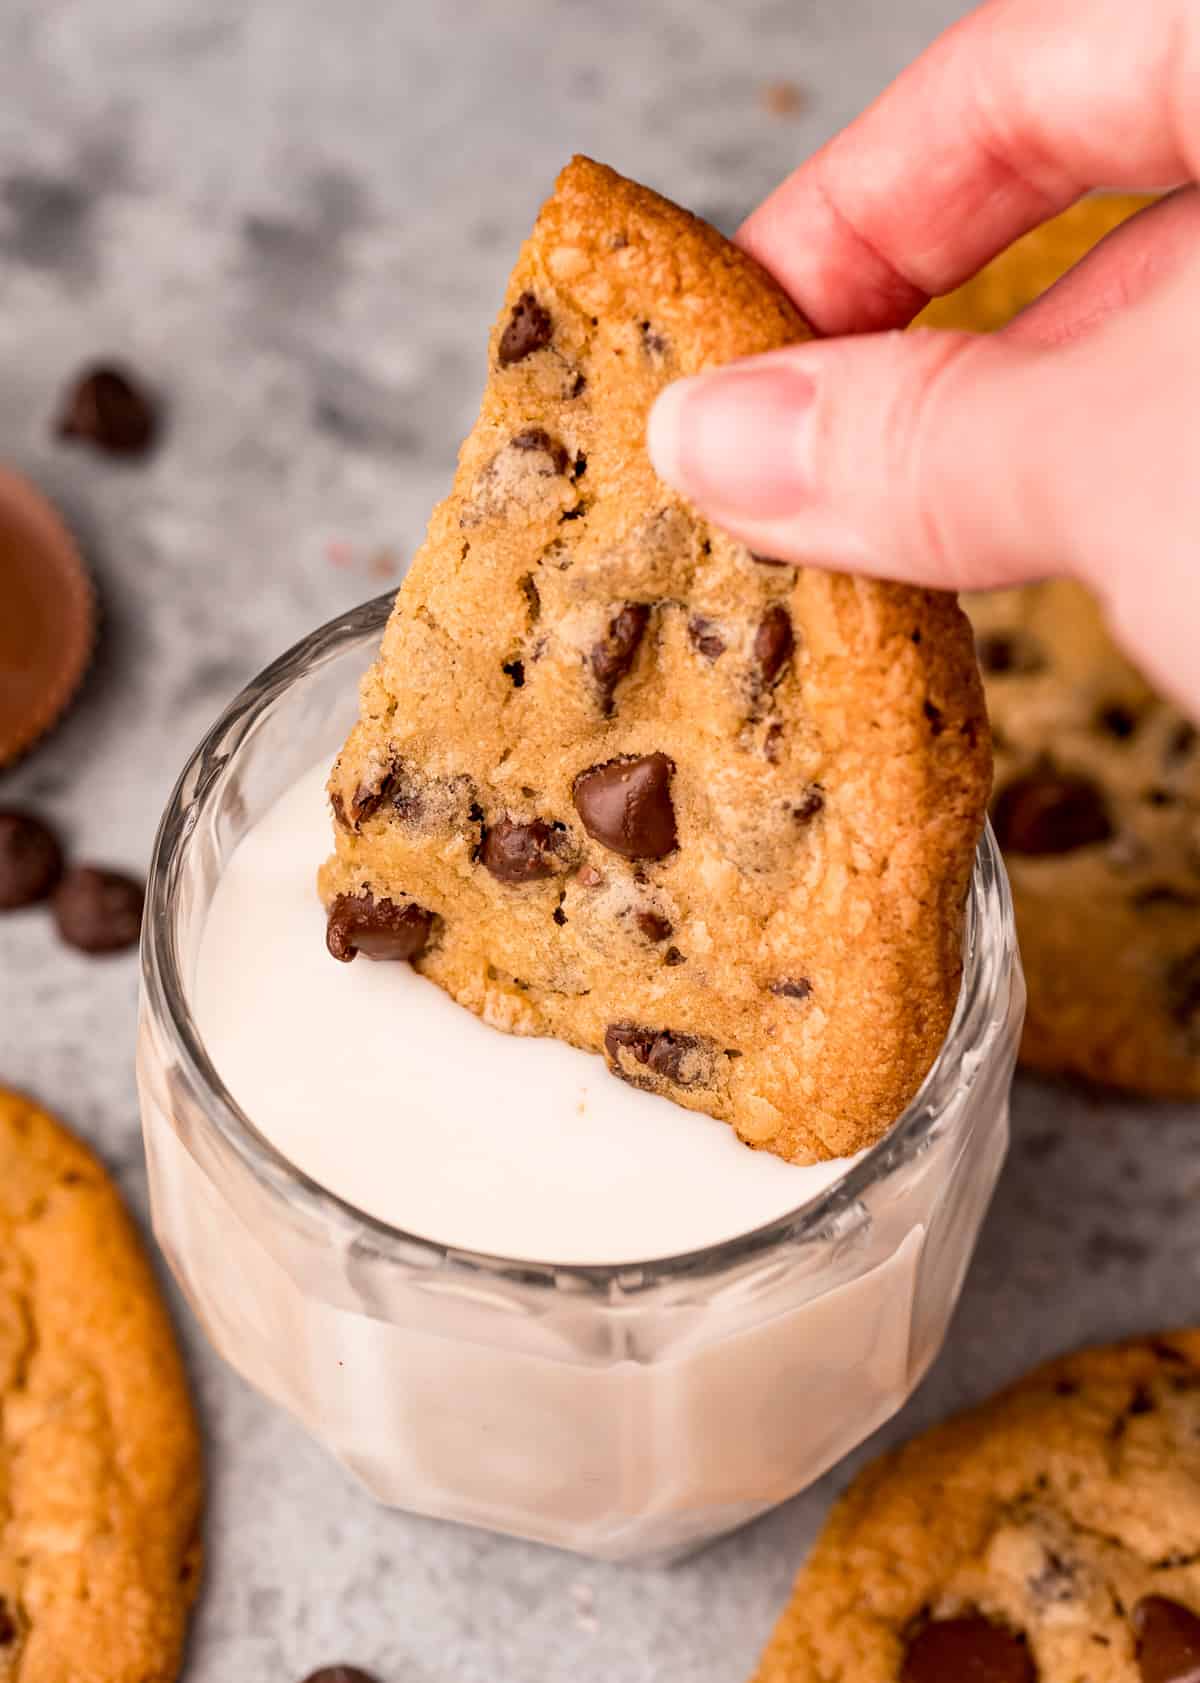 Hand dipping a half of a cookie in milk.